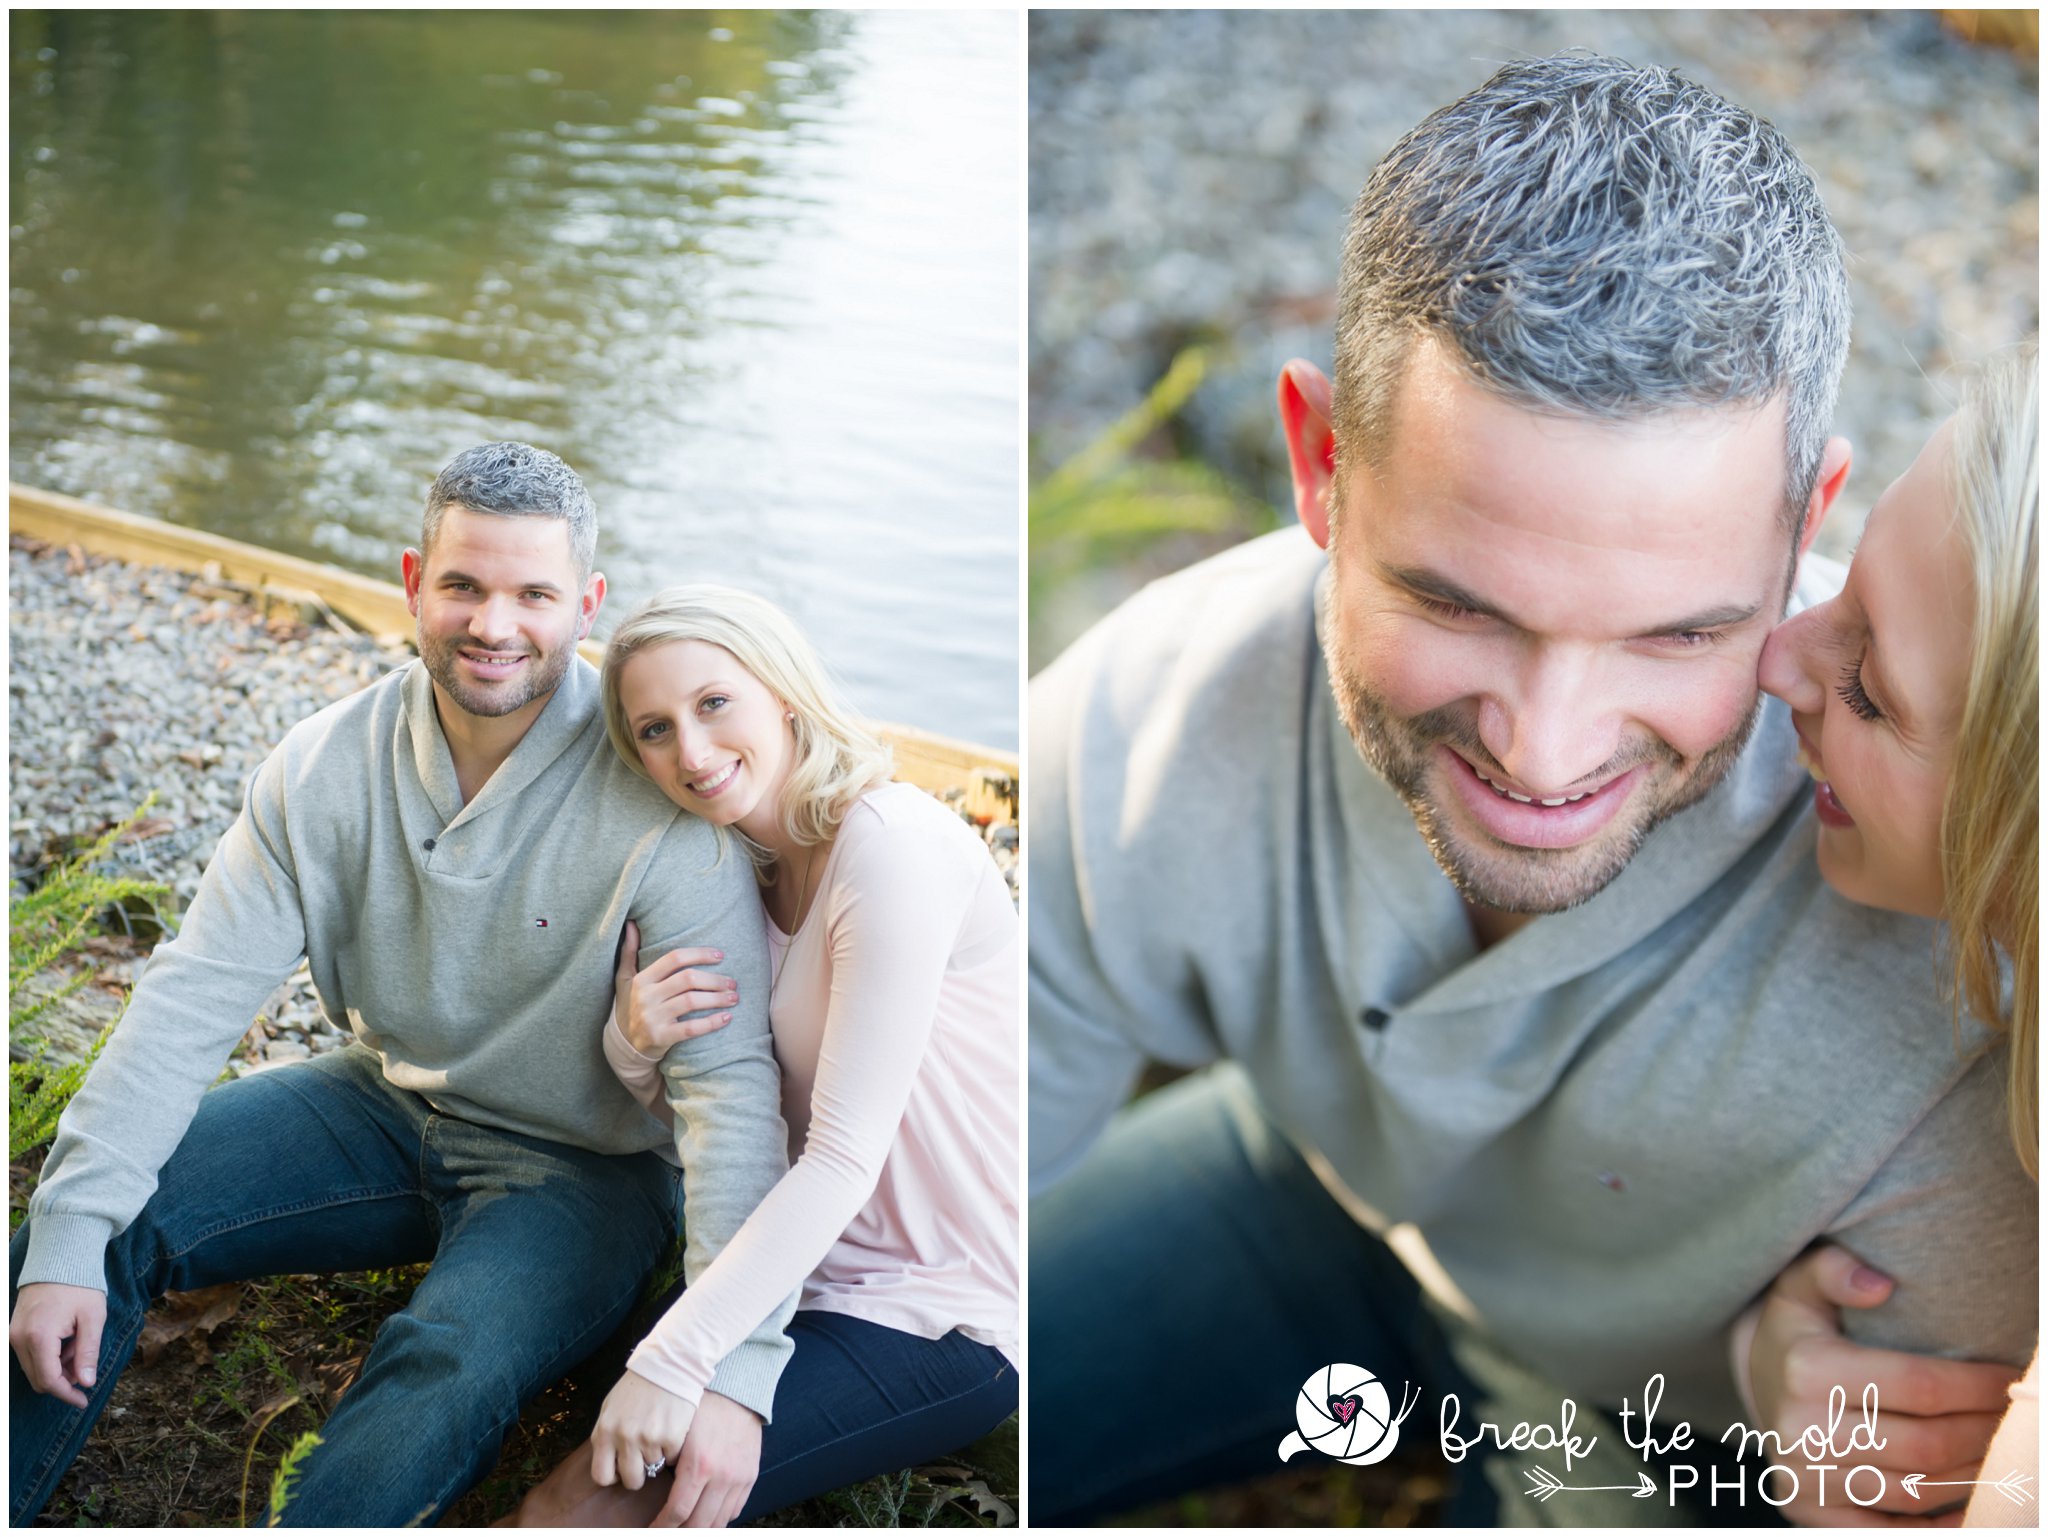 break-the-mold-photo-knoxville-tn-lenoir-city-downtown-outdoor-hiking-engagement-session_2007.jpg